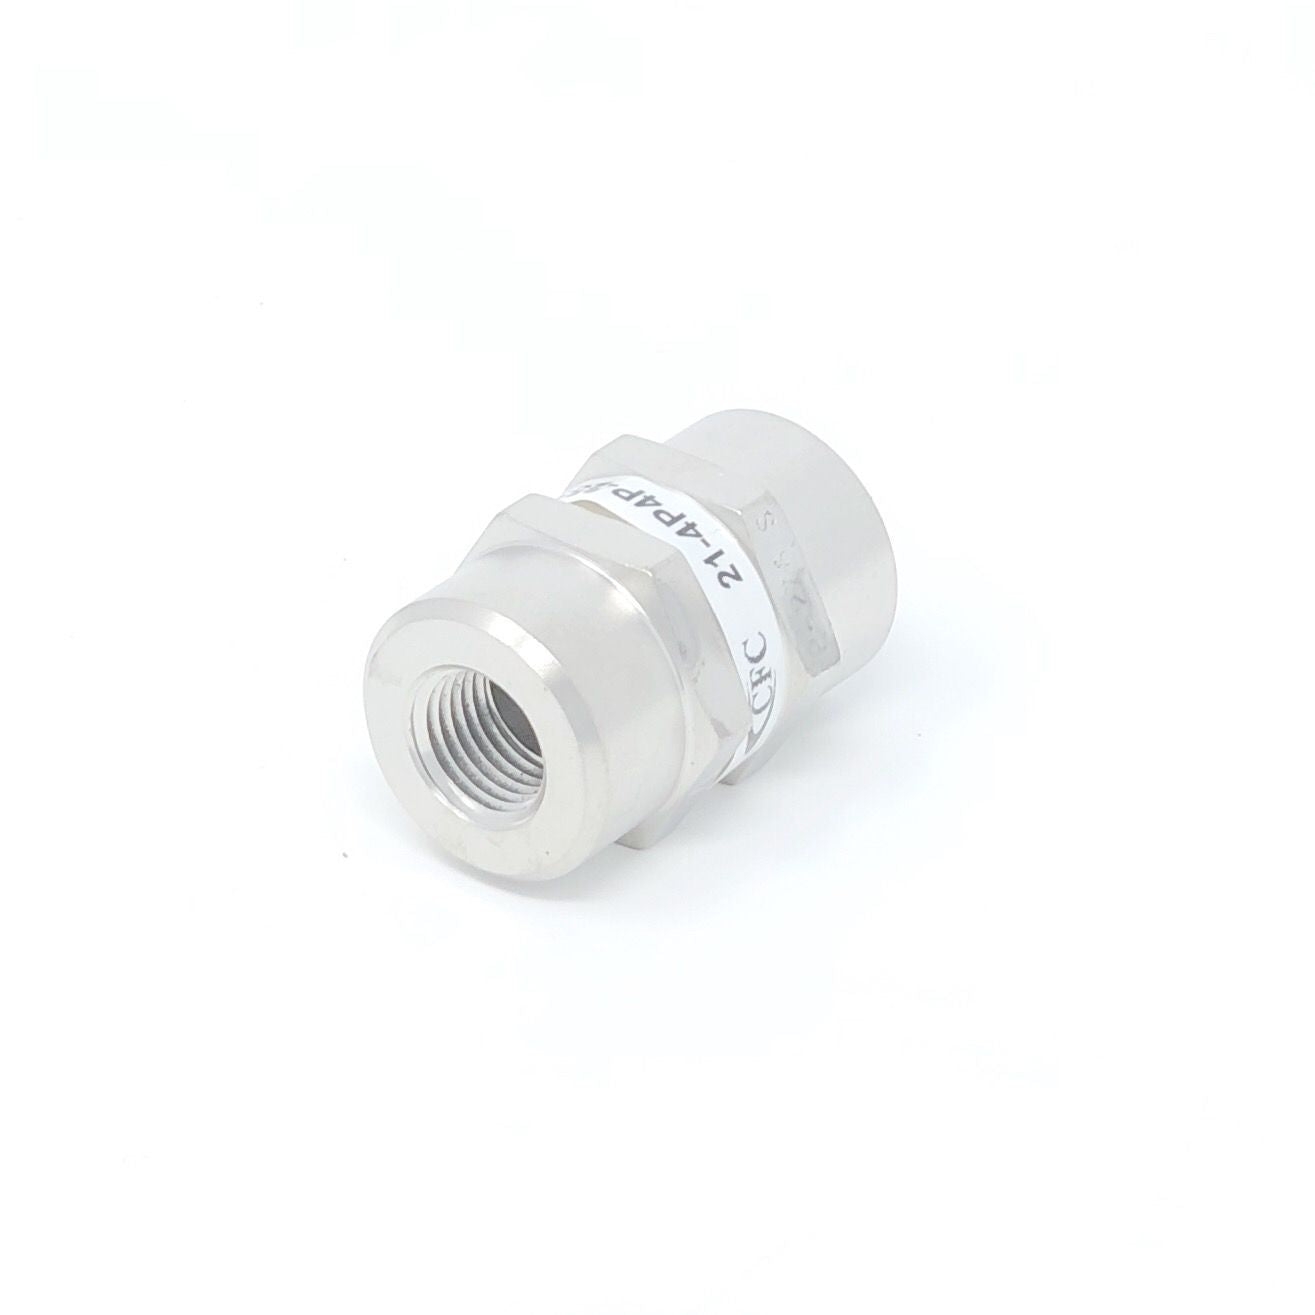 21-12S12S-25S : Chase High Pressure Inline Filter, 3000psi, #12 SAE (3/4"), 25 Micron, No Visual Indicator, With Bypass